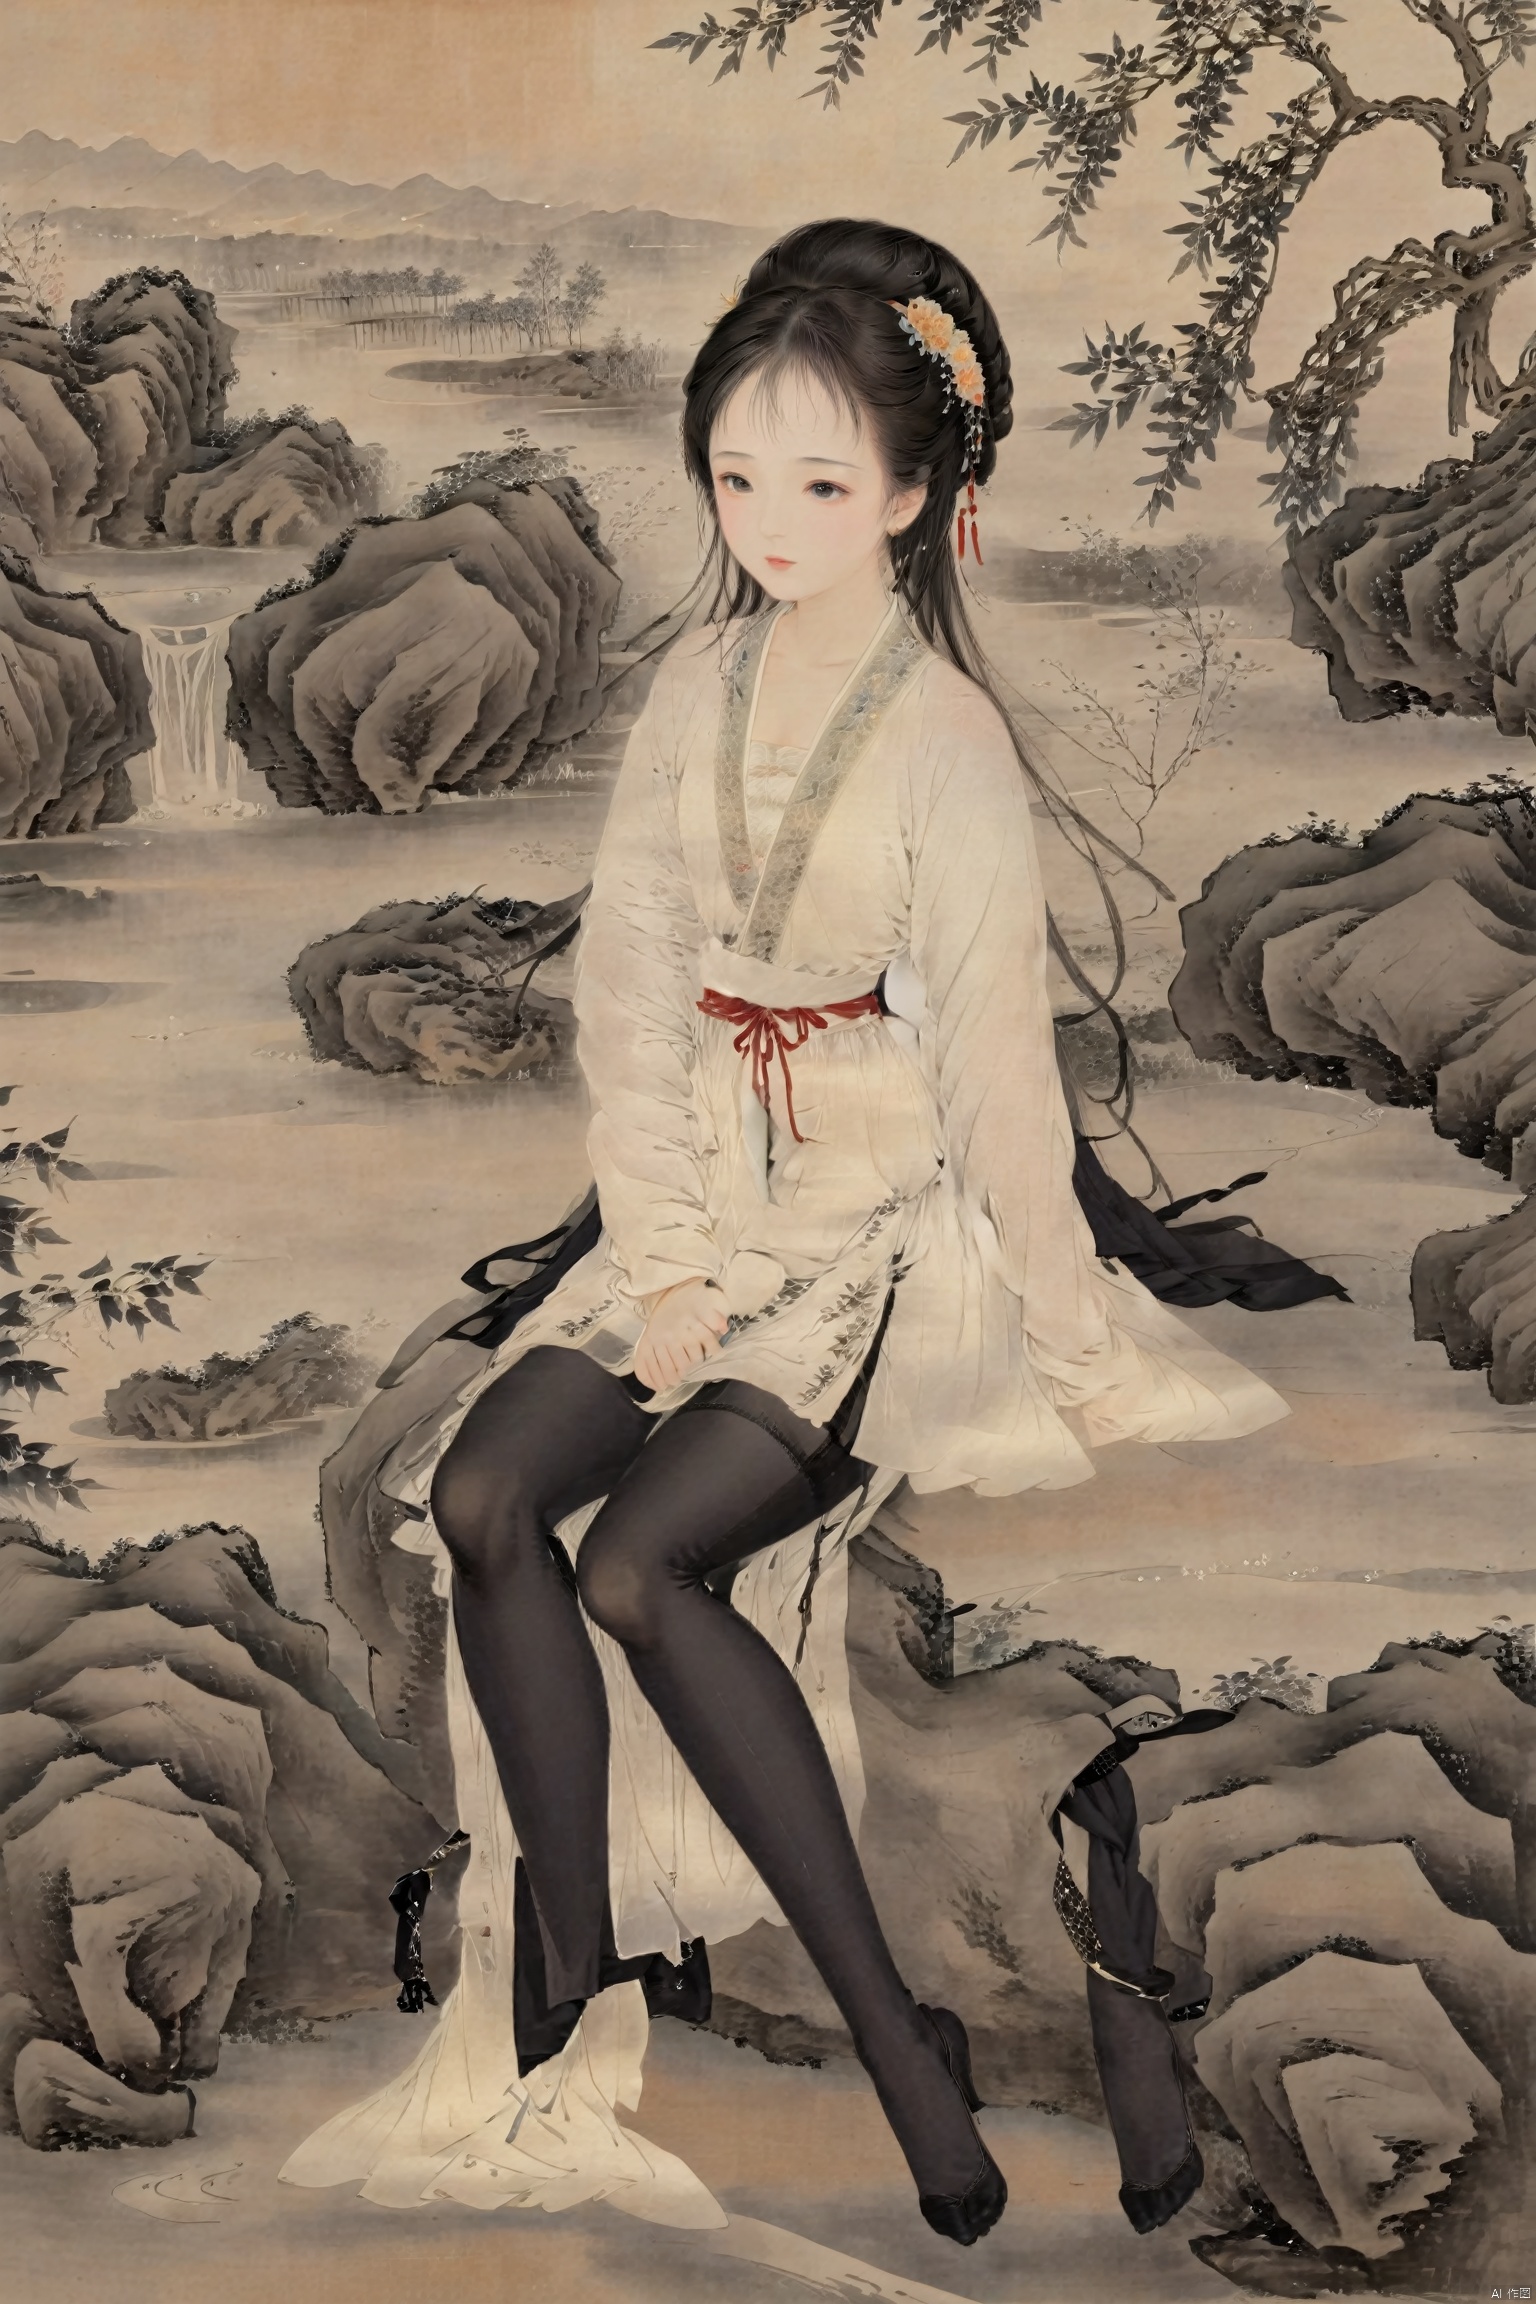  (Young woman: 1.2), (Traditional Chinese ink painting style: 1.0), Ancient women&#39;s hairstyle, antique short skirt, sexy, showing thighs, (Black stockings: 1.3), Elegant movements, (Simple background), Leave blank,, Master&#39;s work, High details, (close-up) figures, meticulous paintings, gray tones of antique paintings, delicate embroidery patterns, moonlight on the lake, breeze blowing willows, flying brushstrokes, poetic atmosphere, elegant manners, classical Chinese gardens, simplicity Pavilions, light clouds and smoke, traditional chinese ink painting, gufengsw001